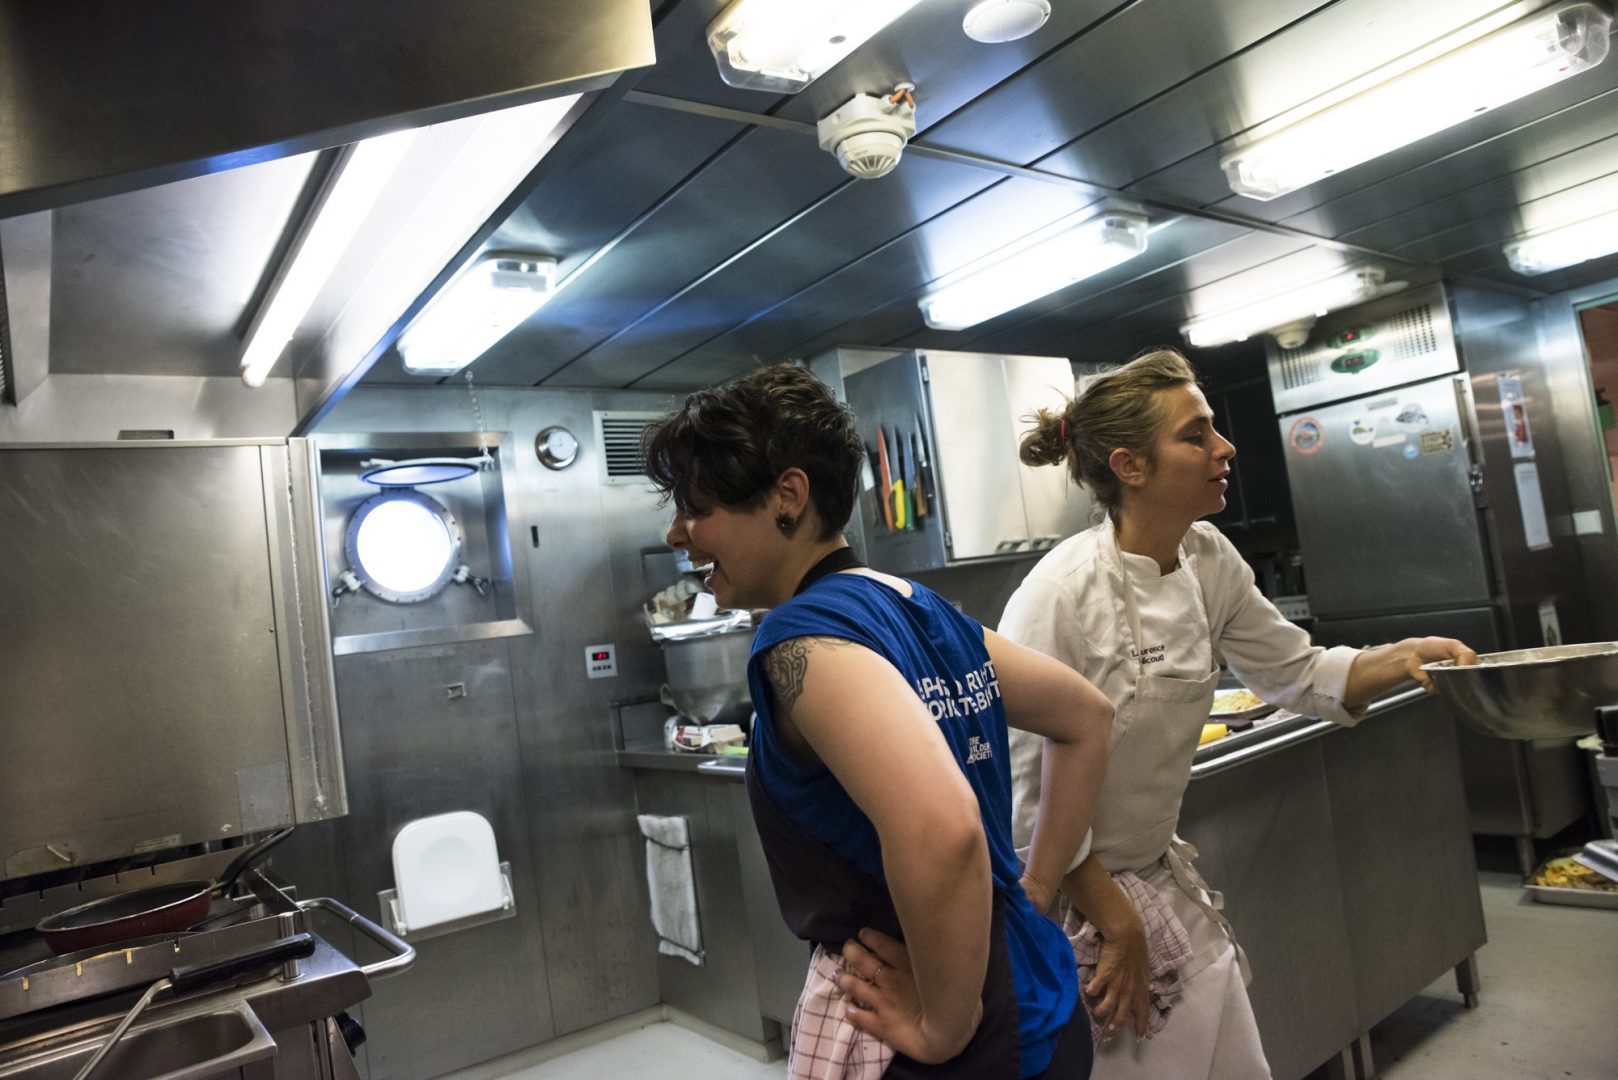 Laurence and Daniela Carvau, volunteer cook’s assistant, in the galley